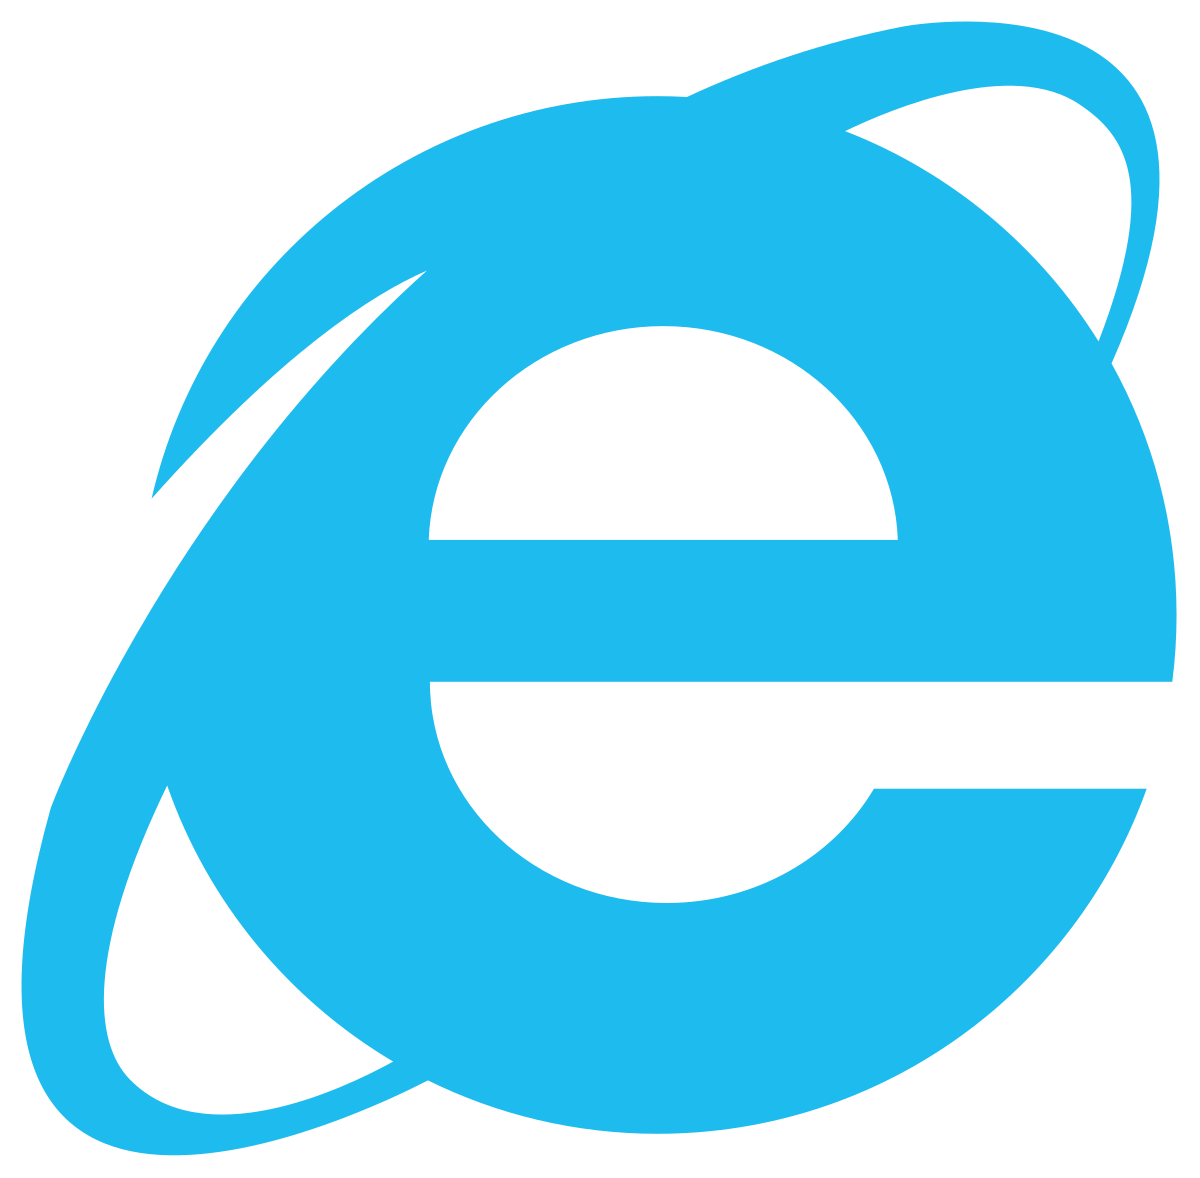 An image of the iexplorer.exe process icon.